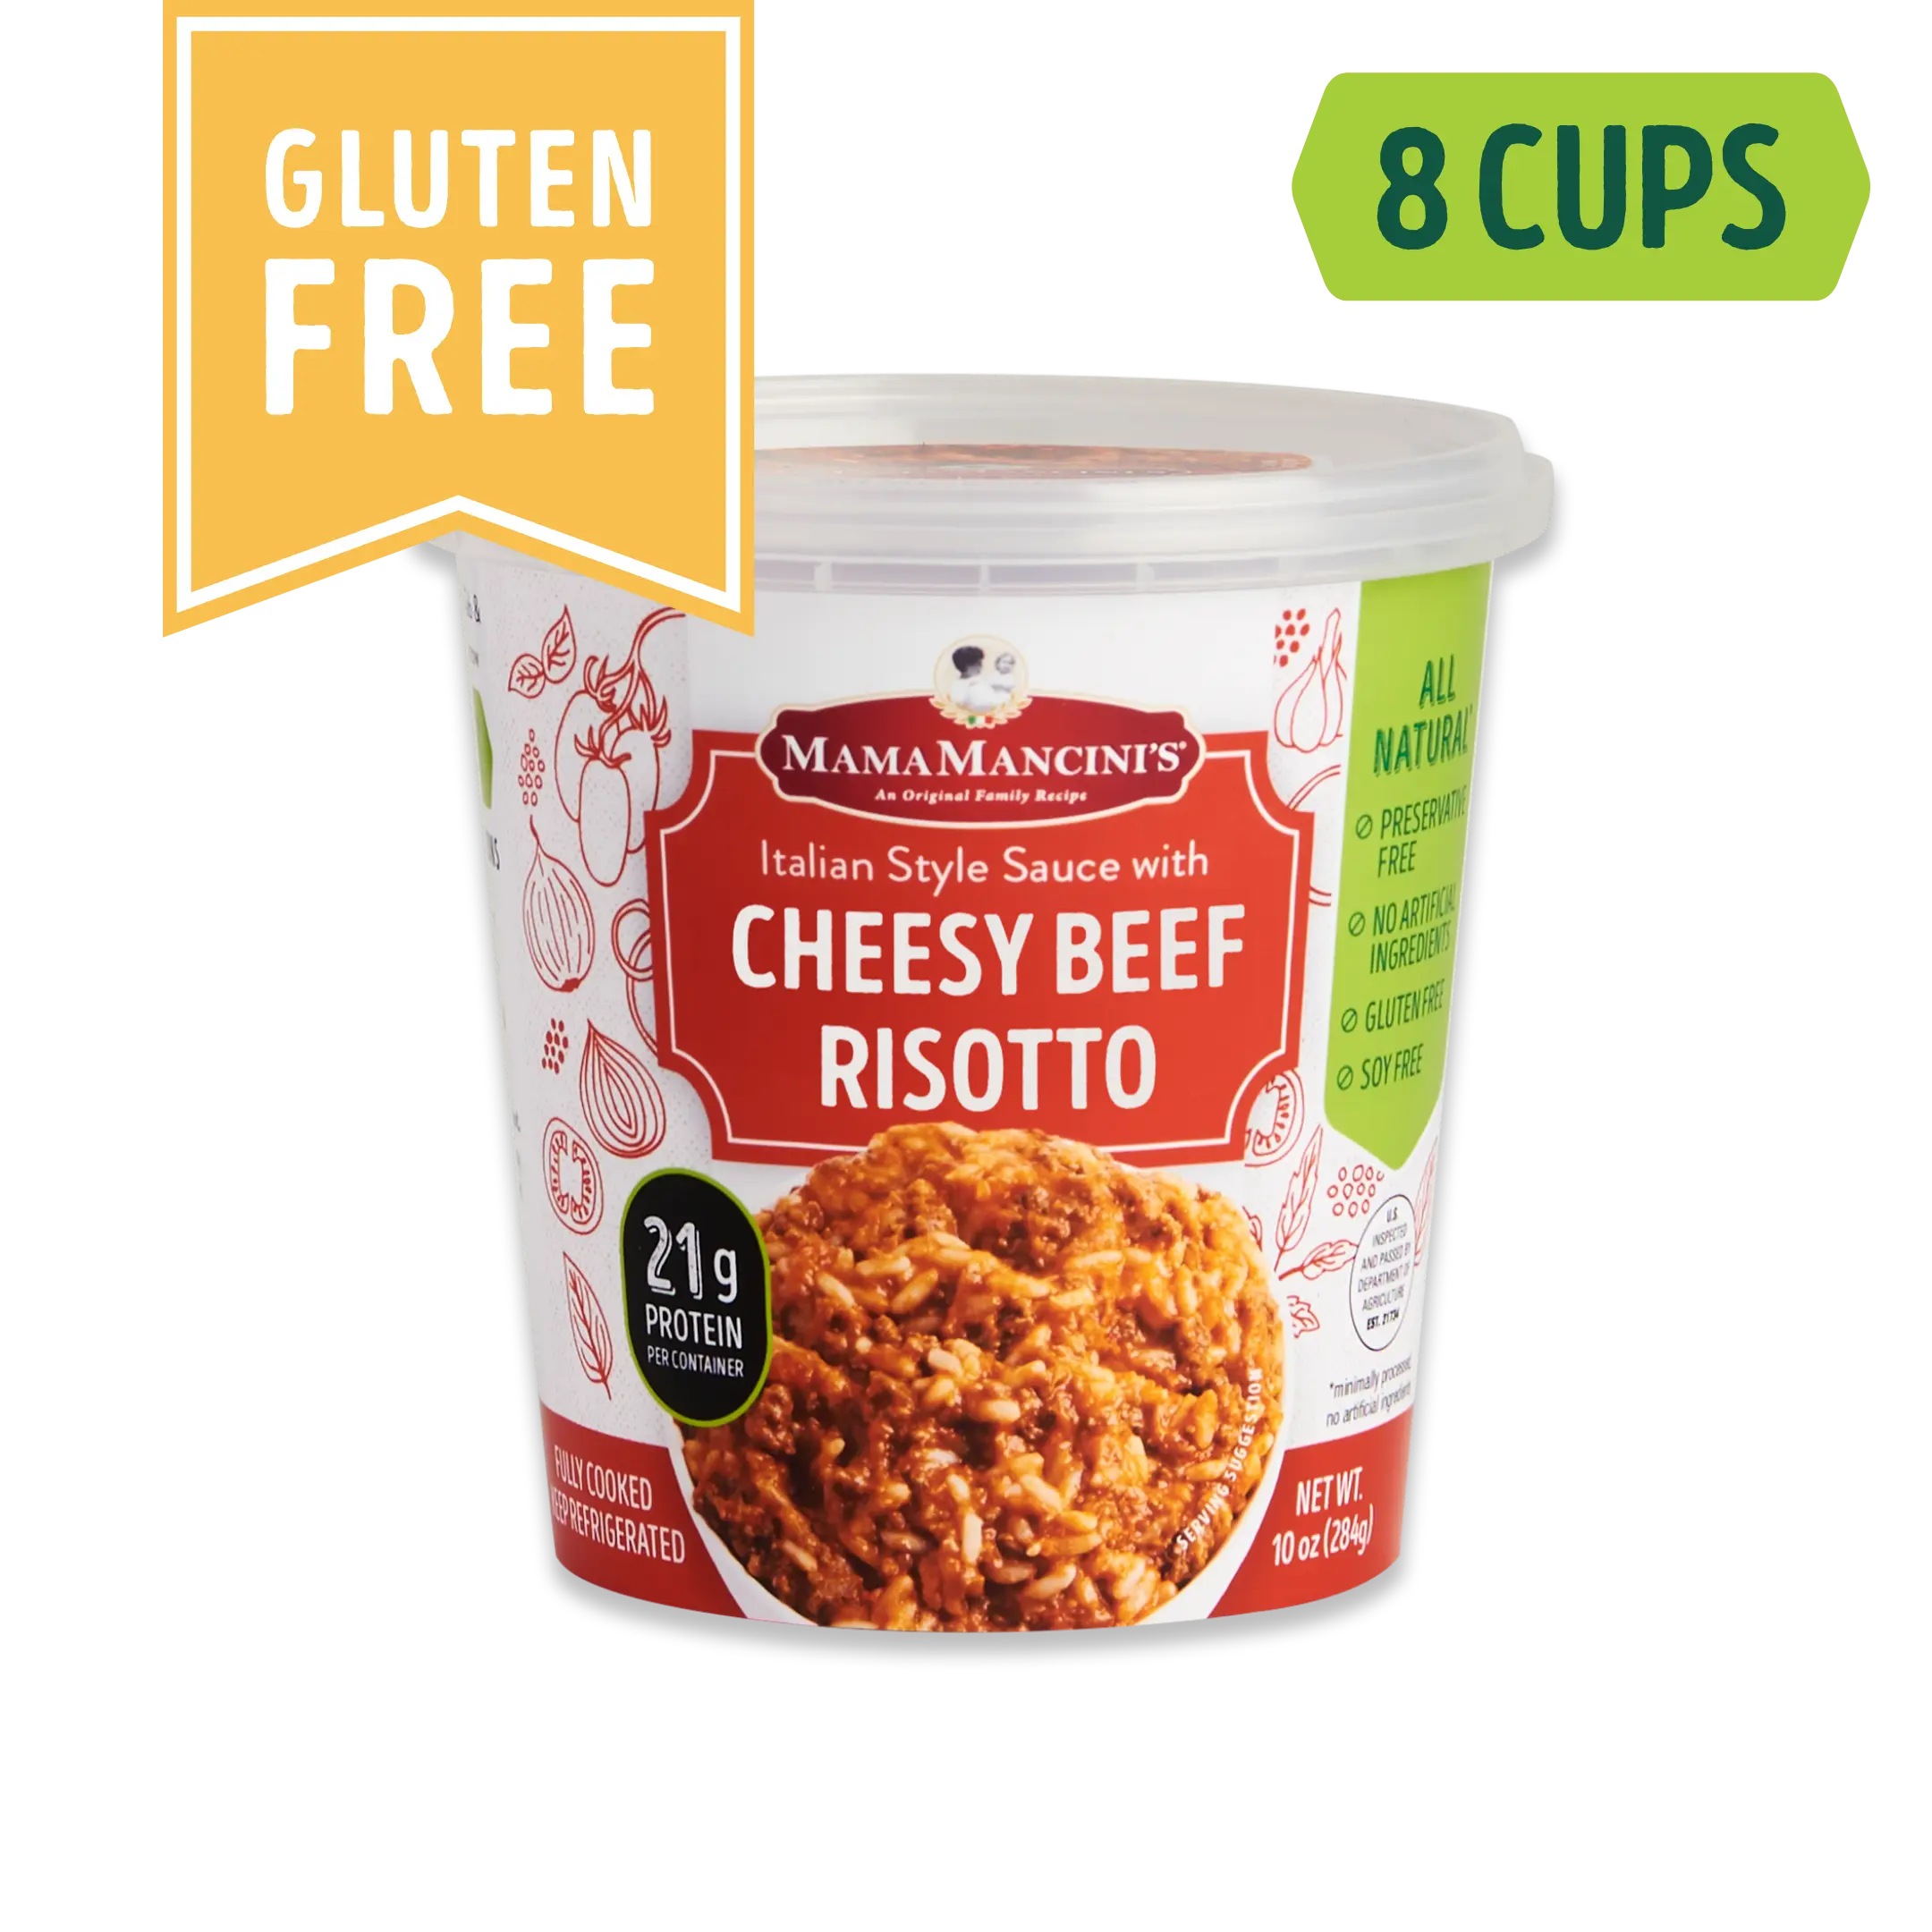 Cheesy Beef Risotto in Italian Style Sauce 10oz Cup (8 Pack)